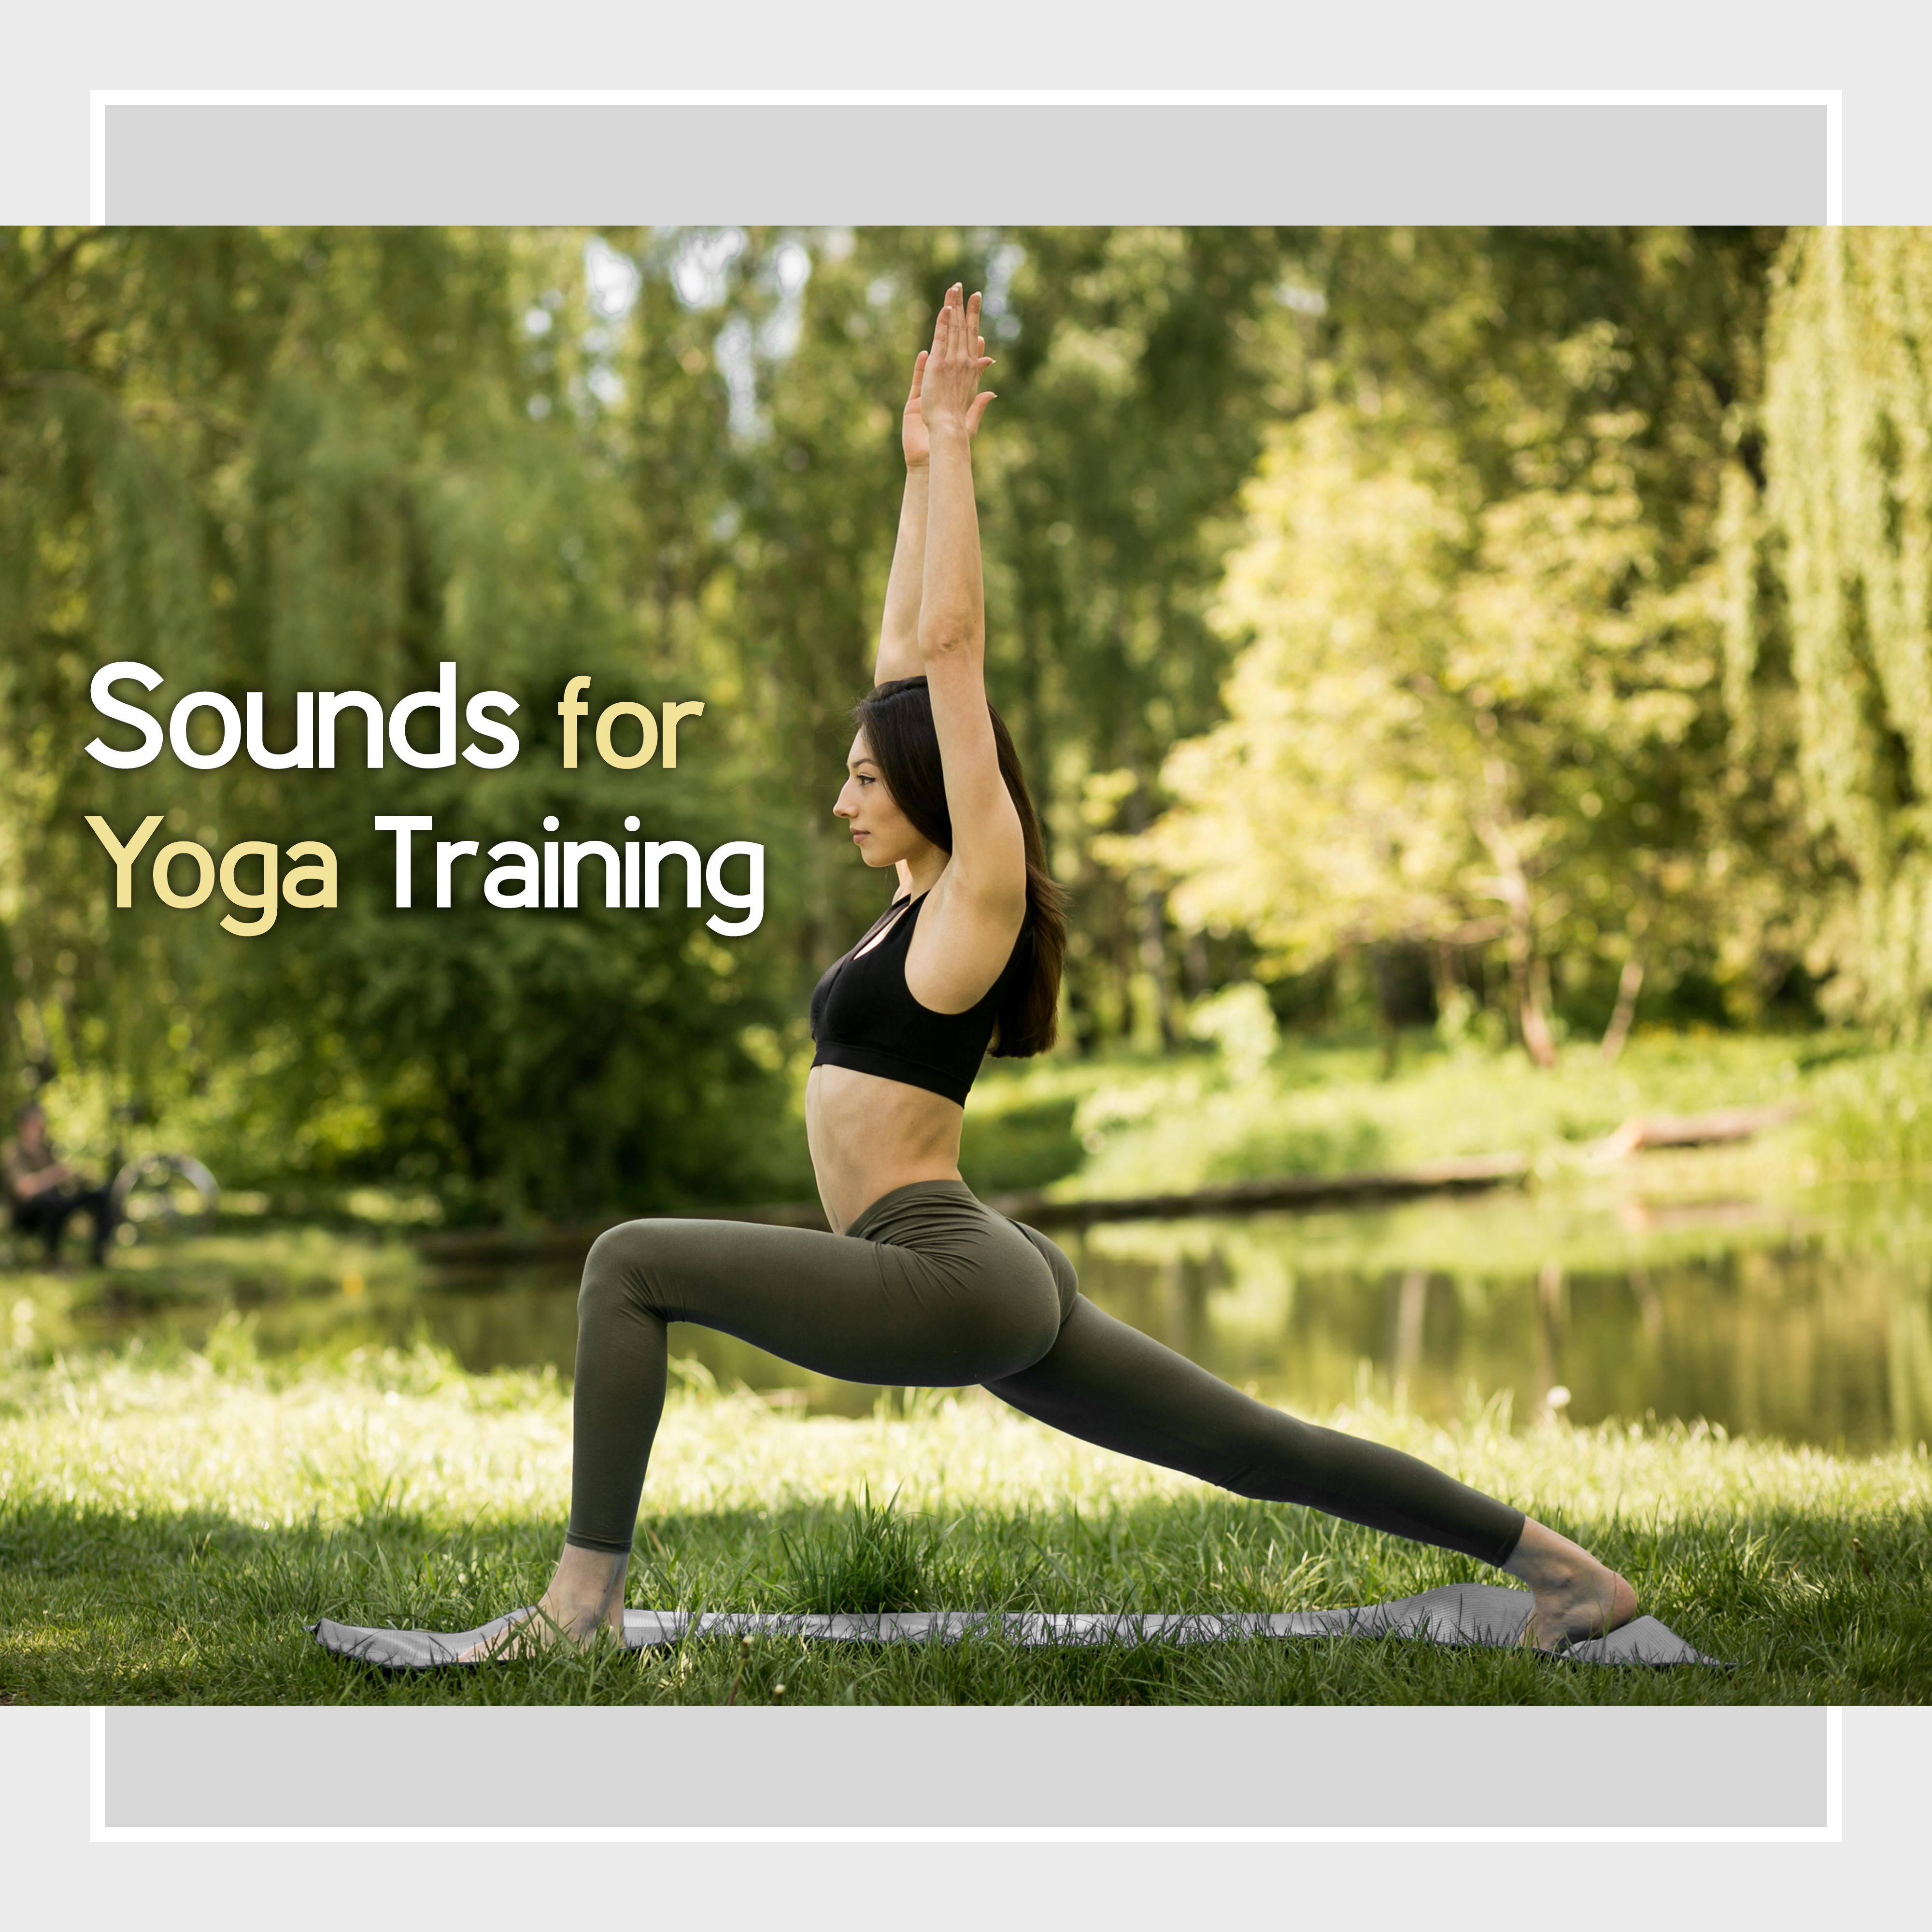 Sounds for Yoga Training